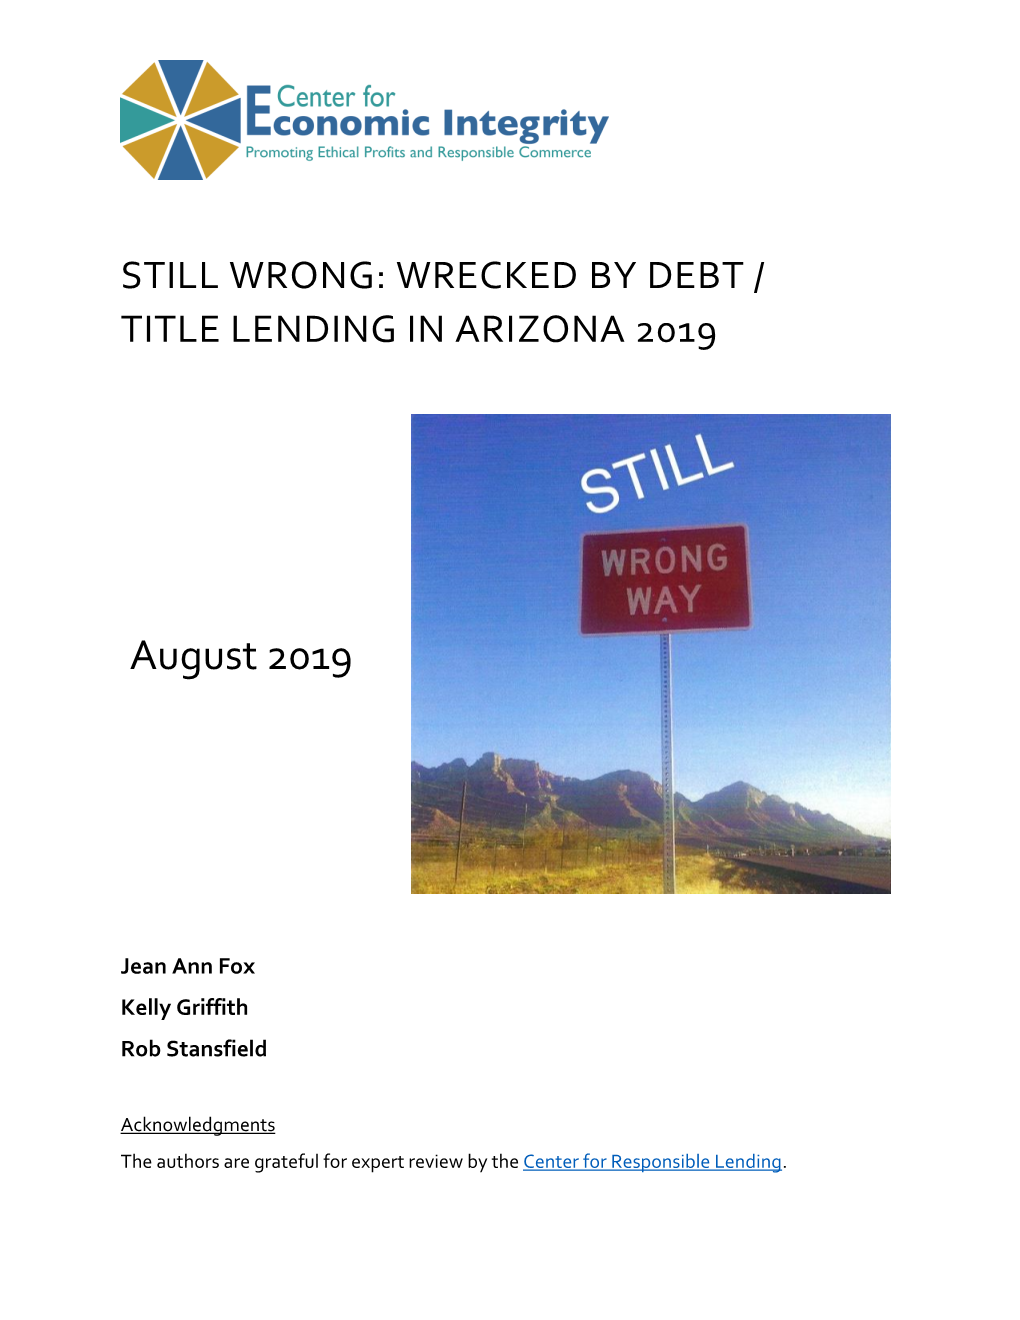 Still Wrong: Wrecked by Debt-Auto Title Lending in Arizona in 2019